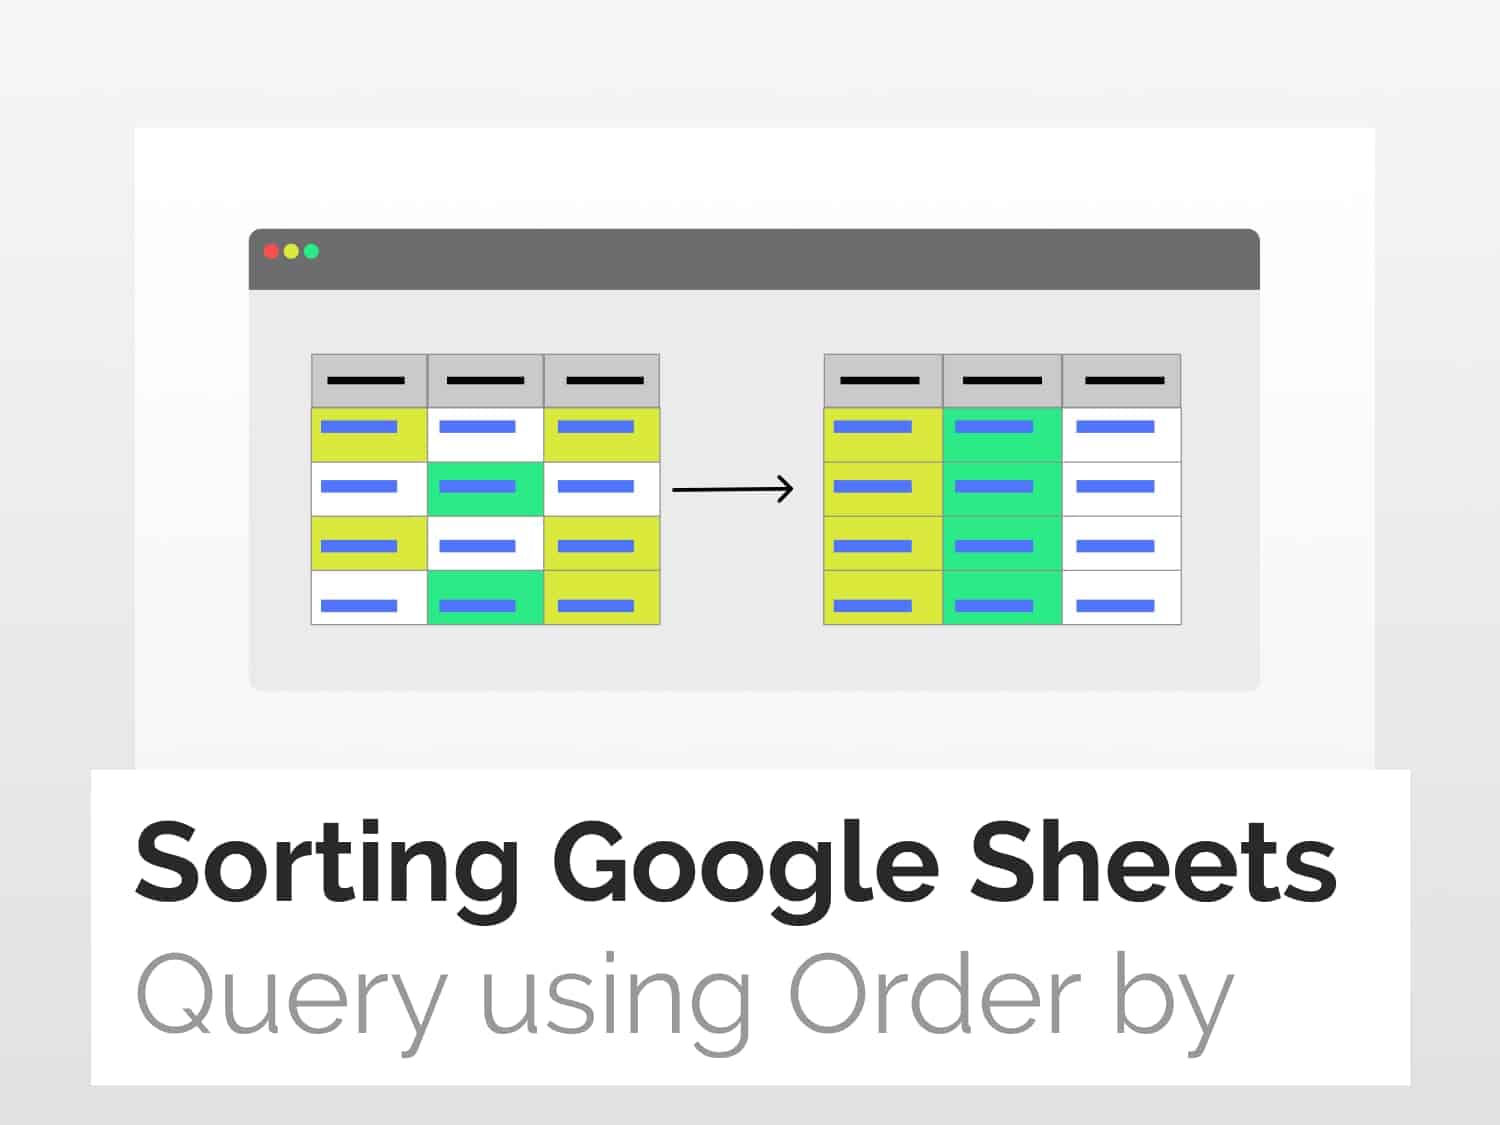 How to sort Query using ORDER BY in Google Sheets